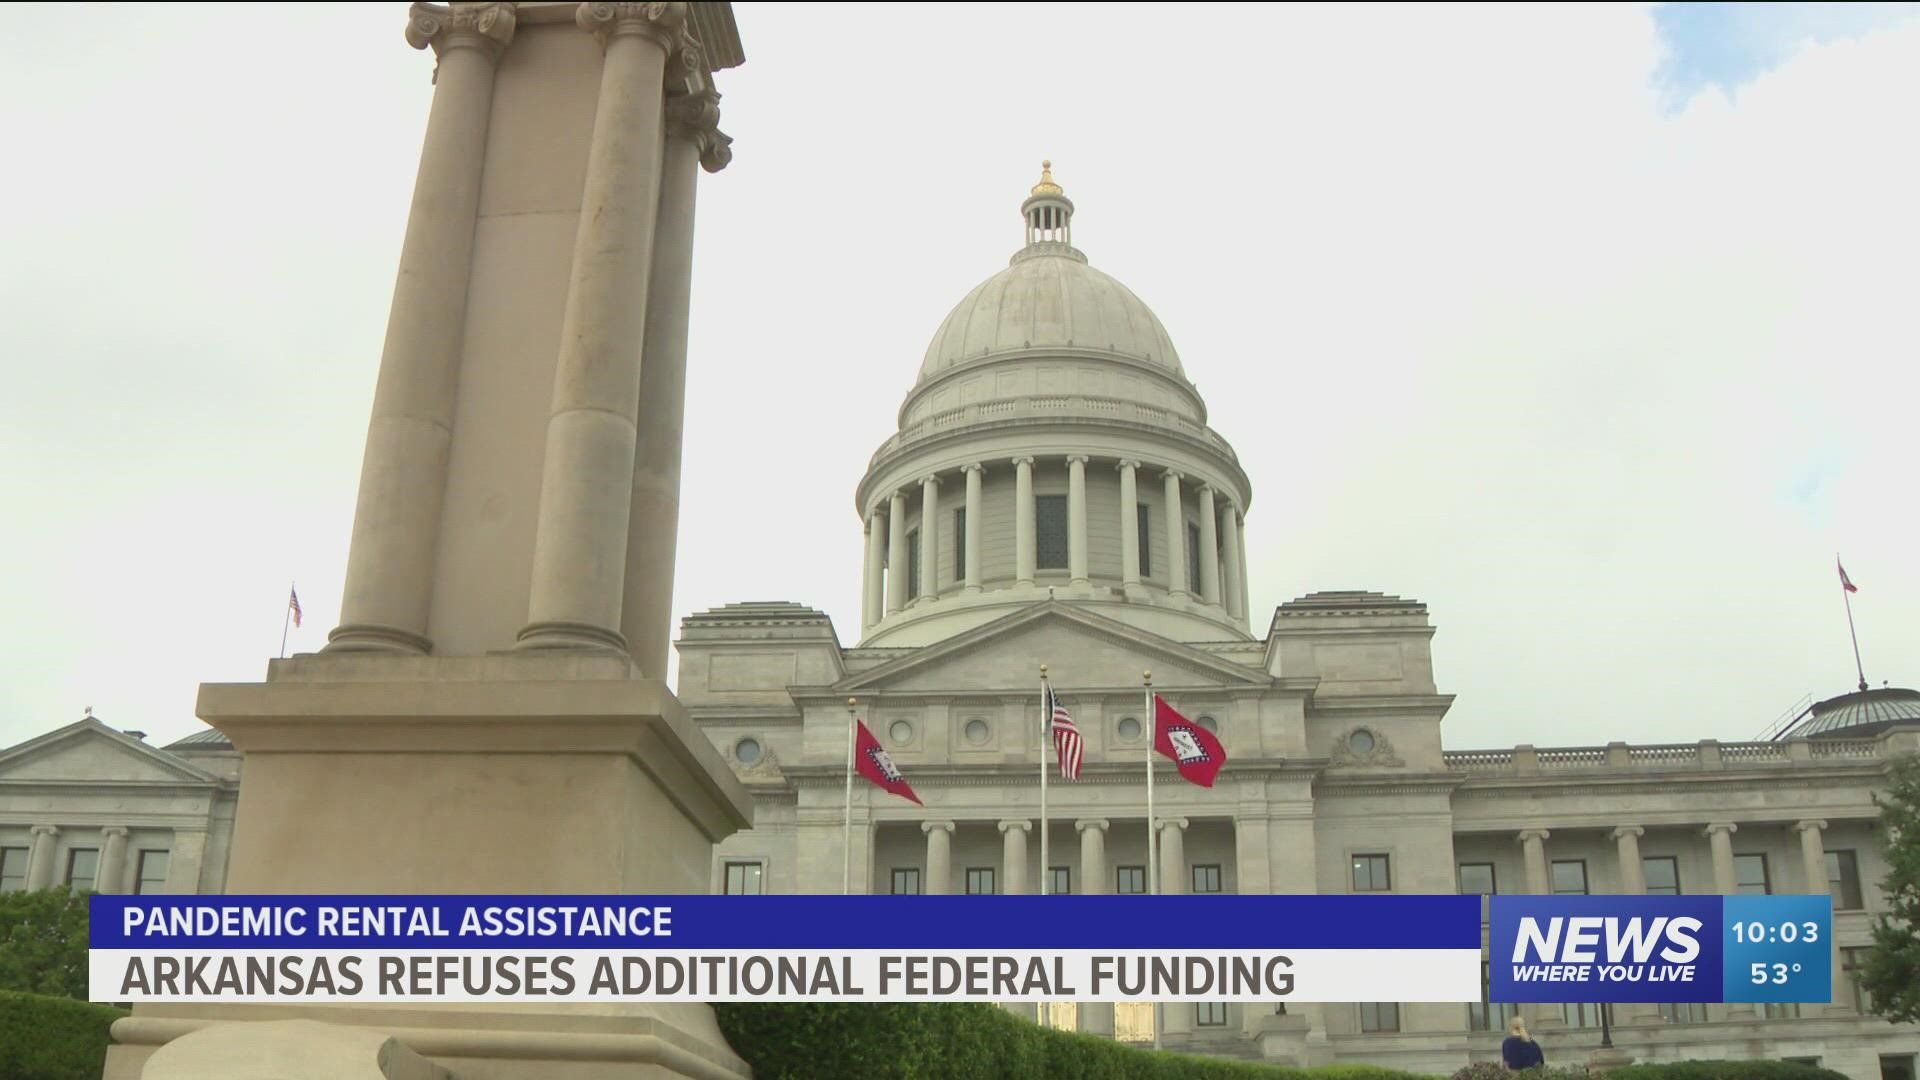 Governor Asa Hutchinson announced that the state will not take the $146 million for rental assistance. And will only take up to 39% of that amount.